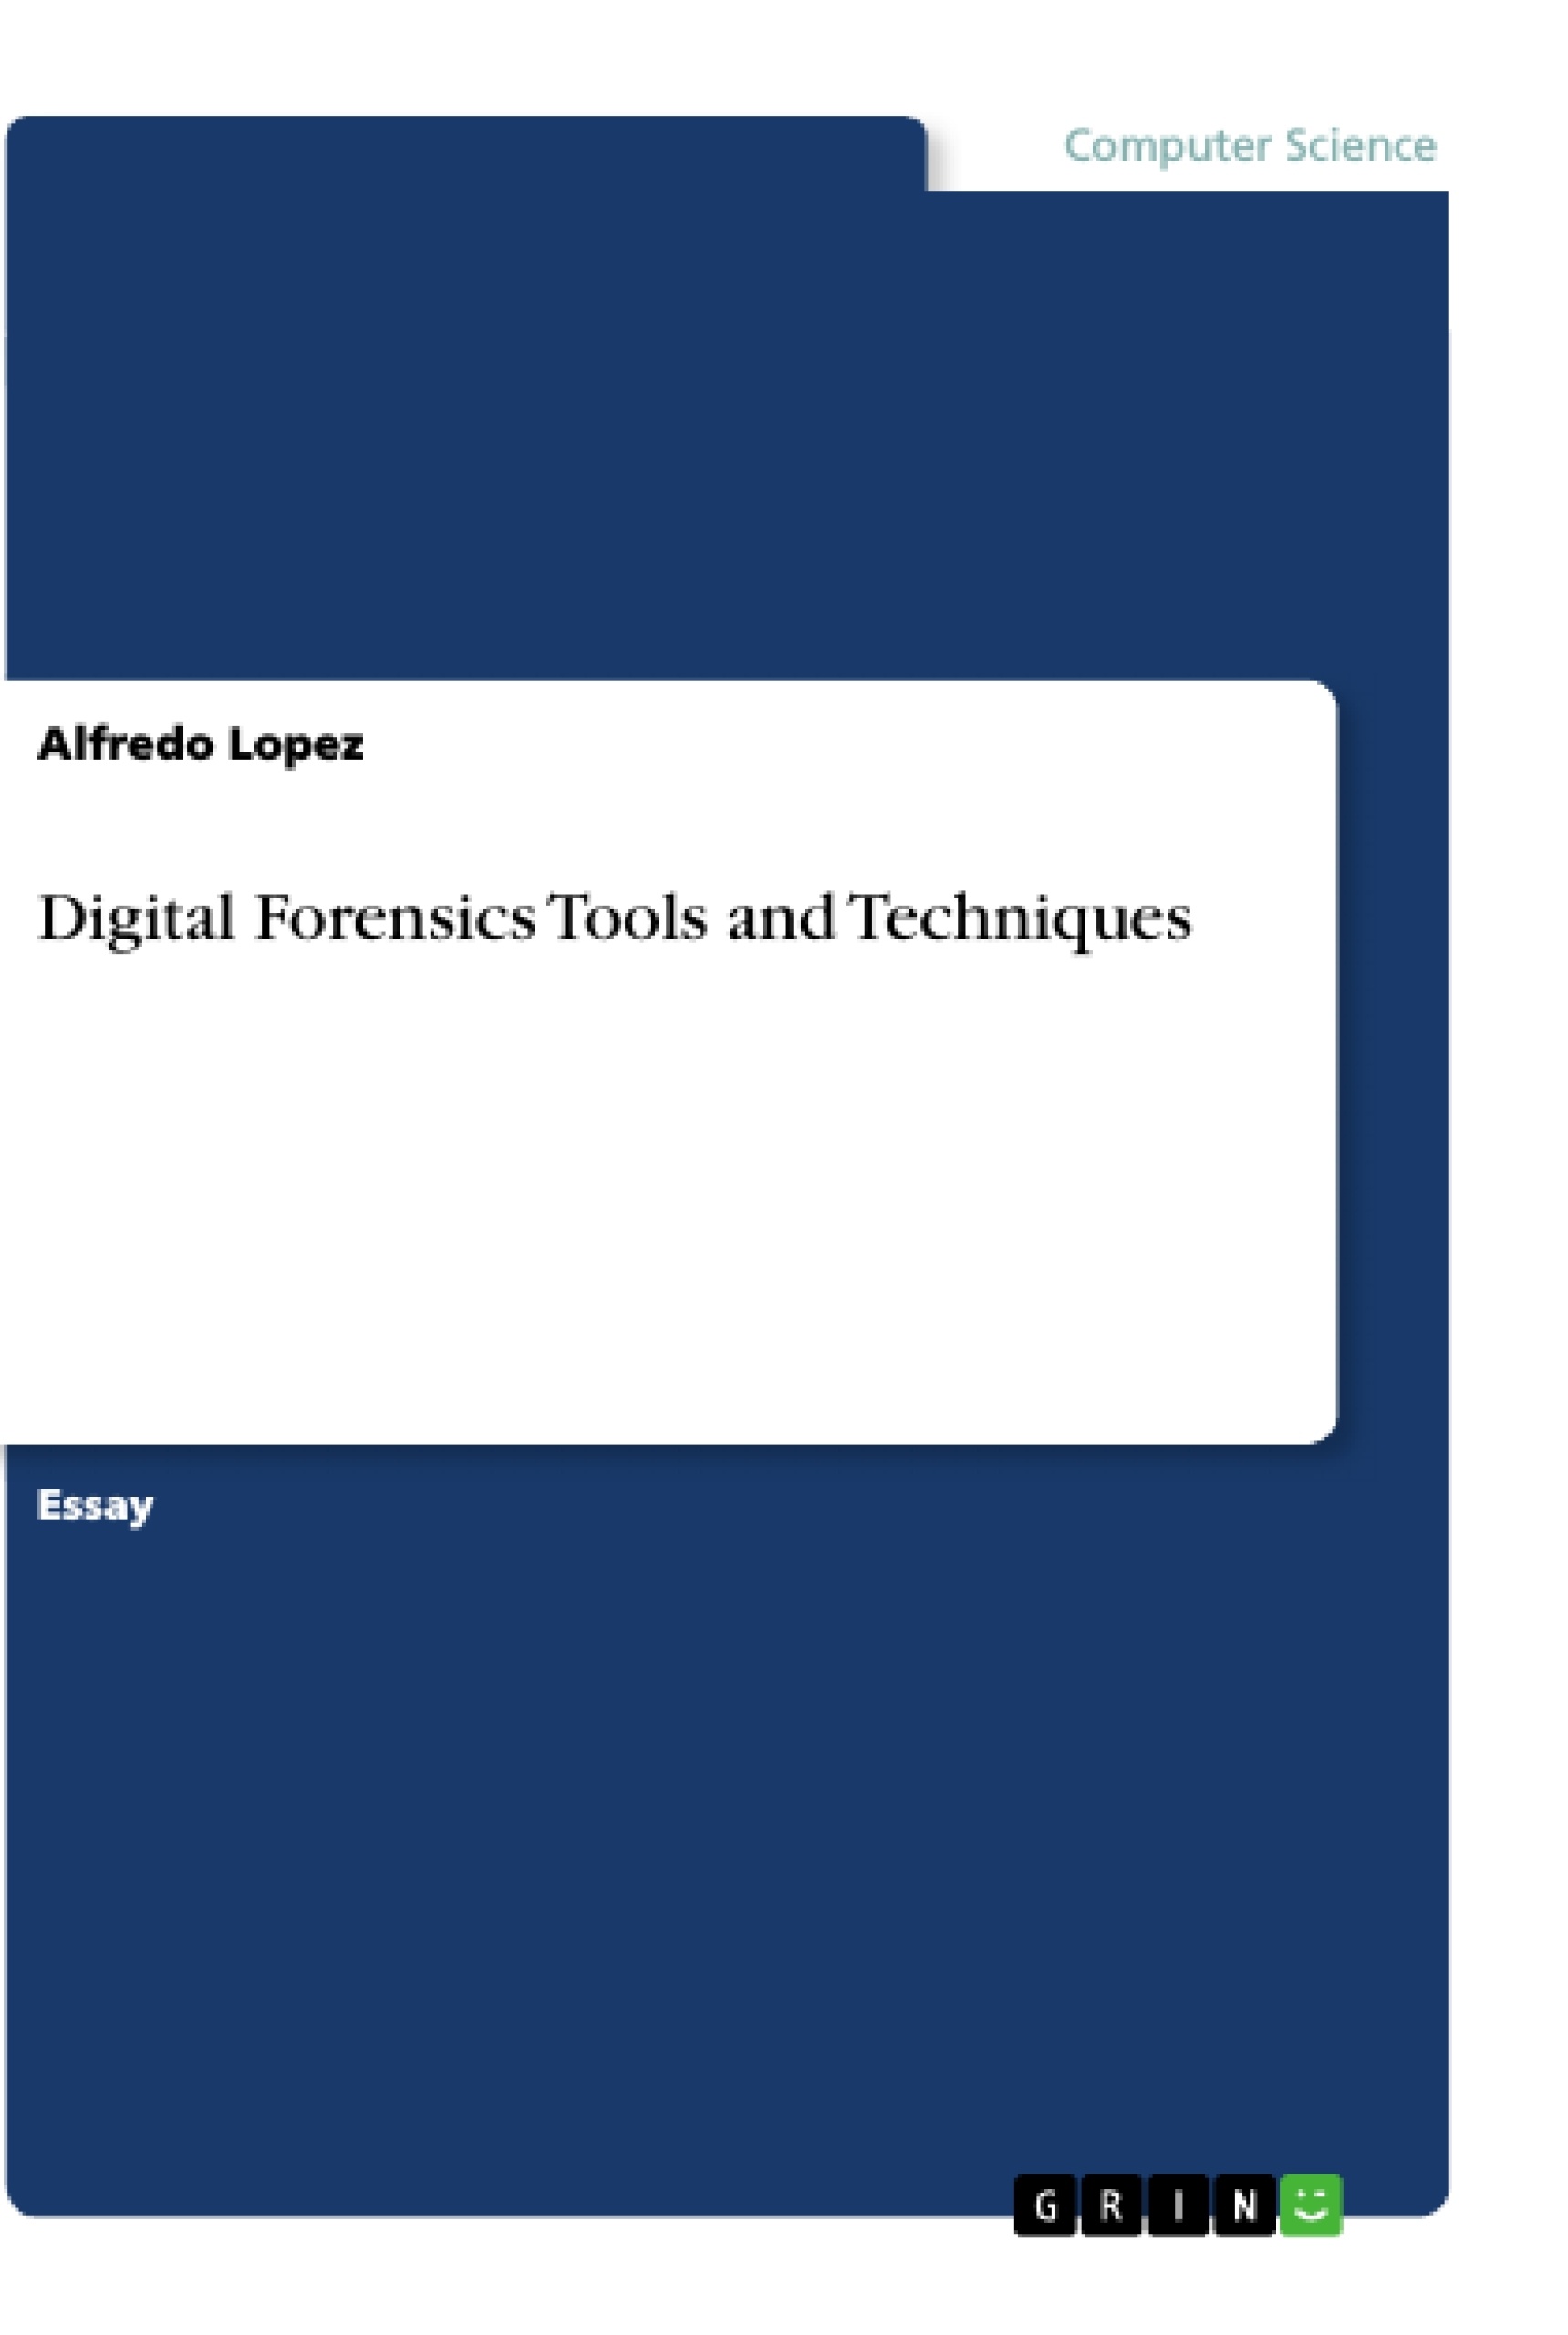 digital forensics research papers